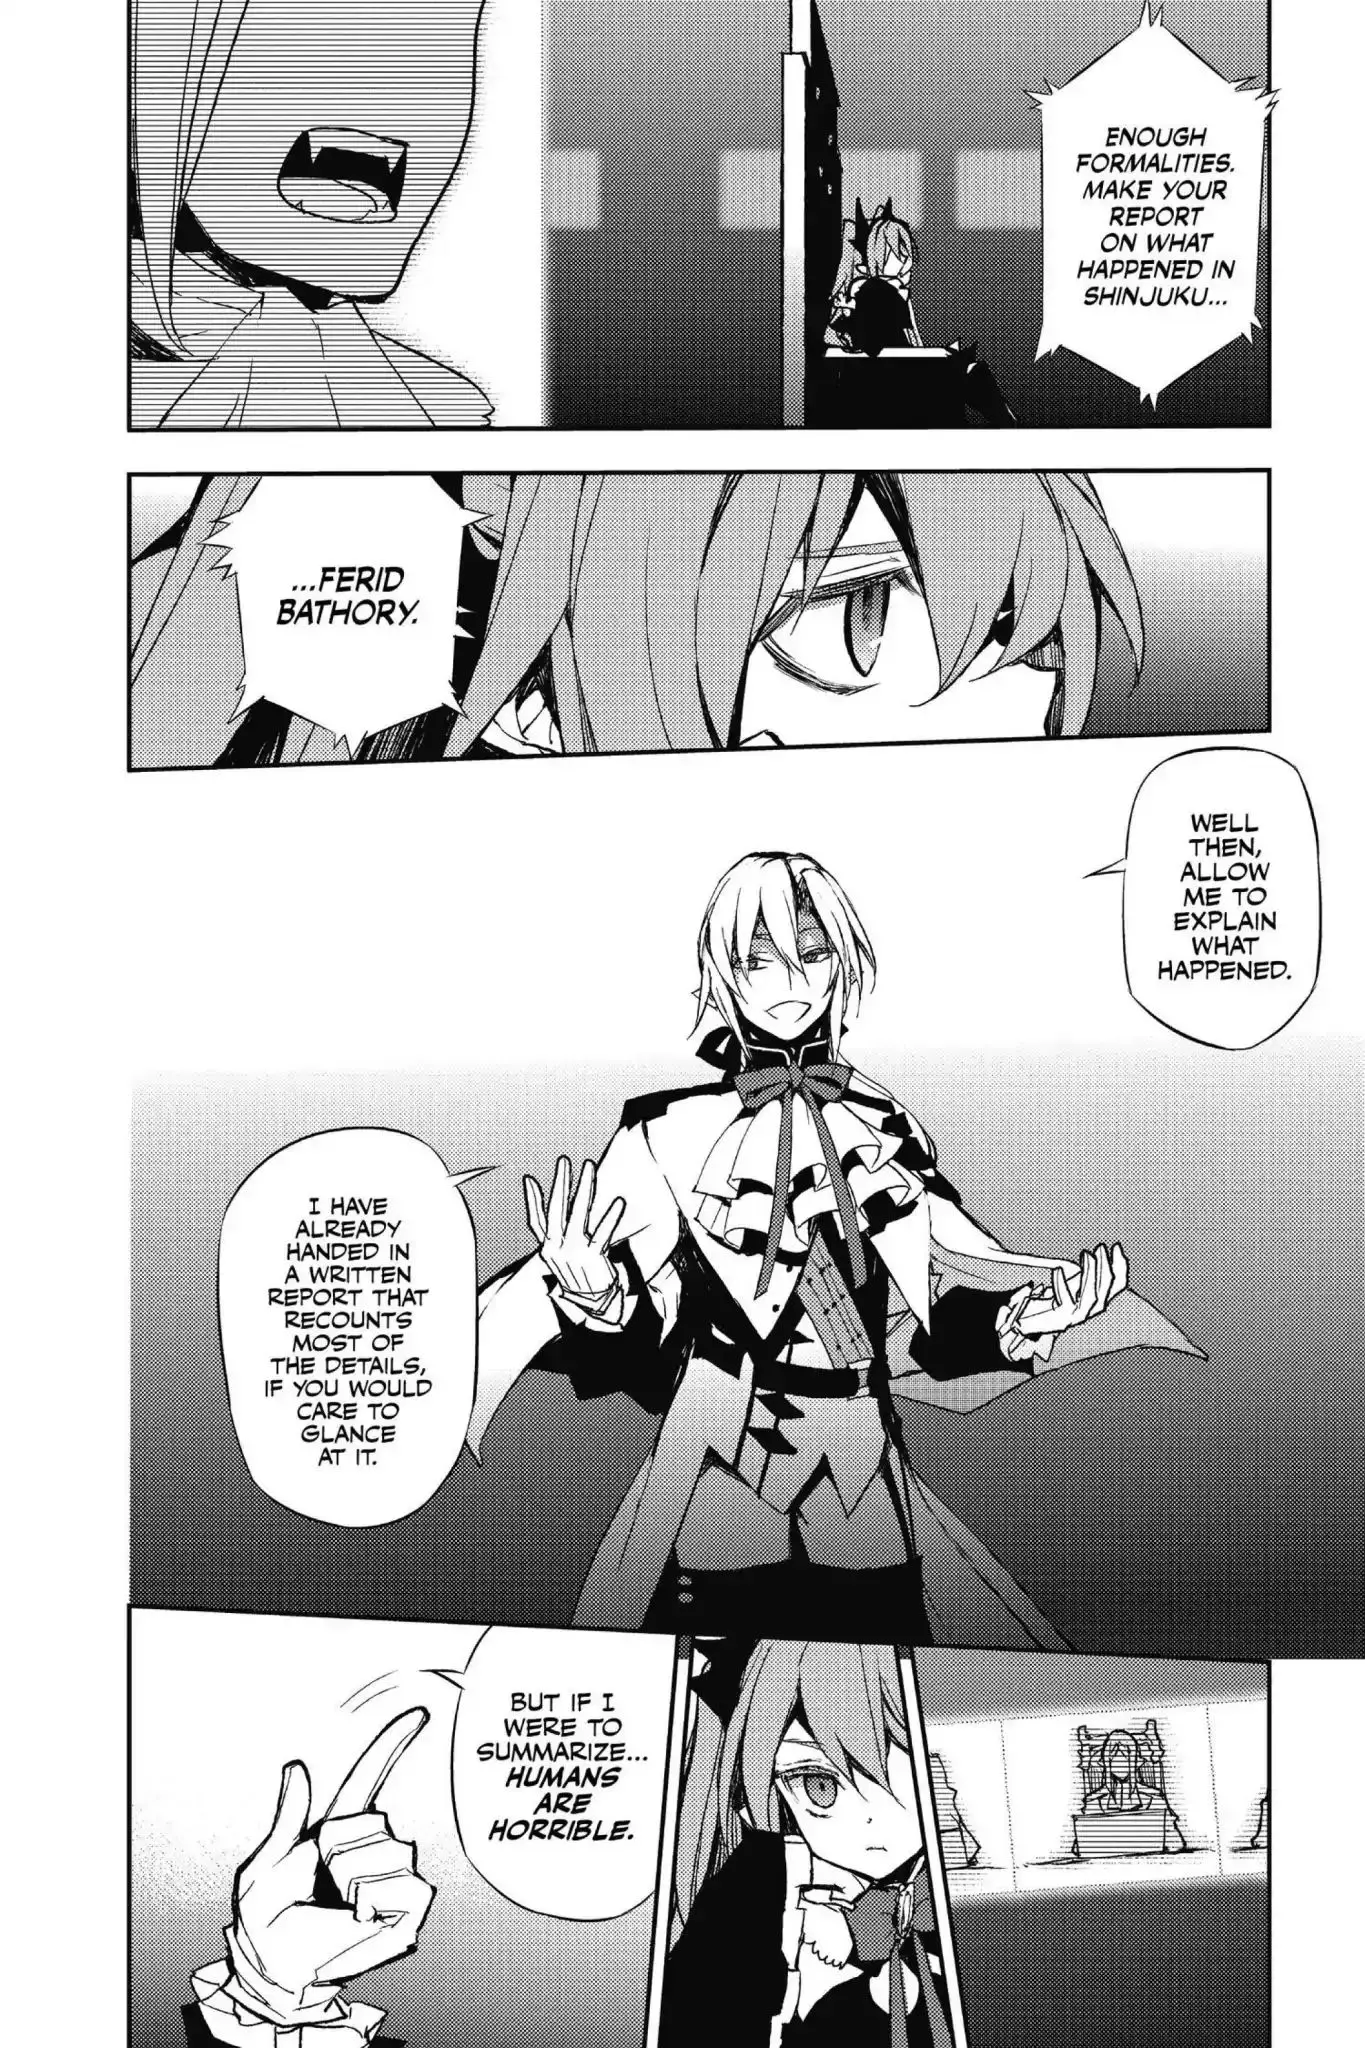 Seraph Of The End - 22 page 18-05215c41